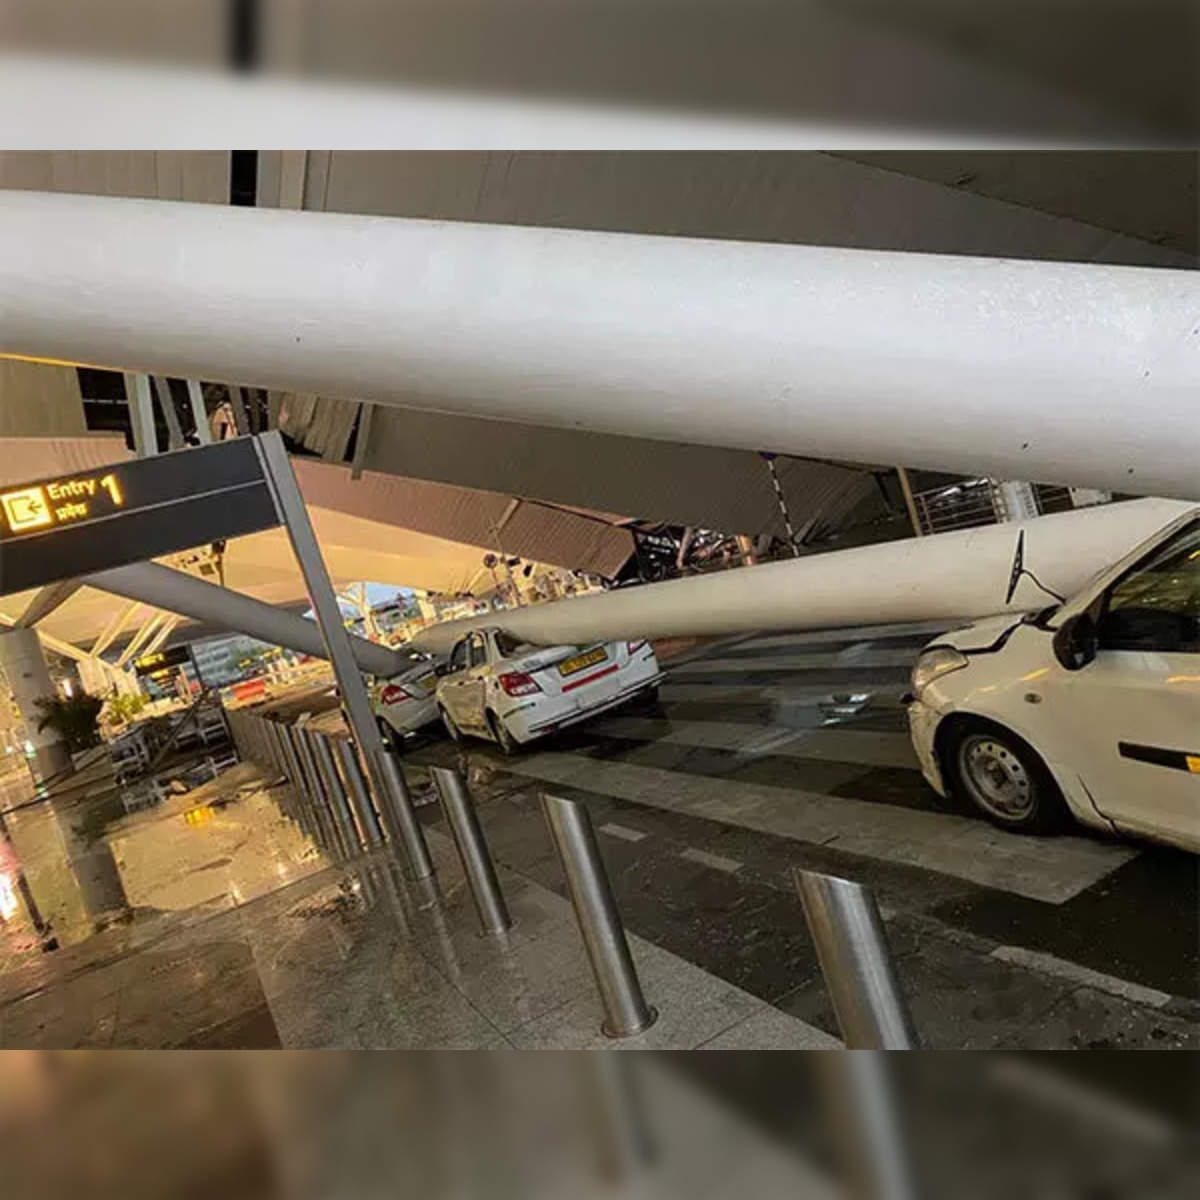 Criminal negligence responsible for shoddy infrastructure: Congress on  Delhi airport roof collapse - The Economic Times